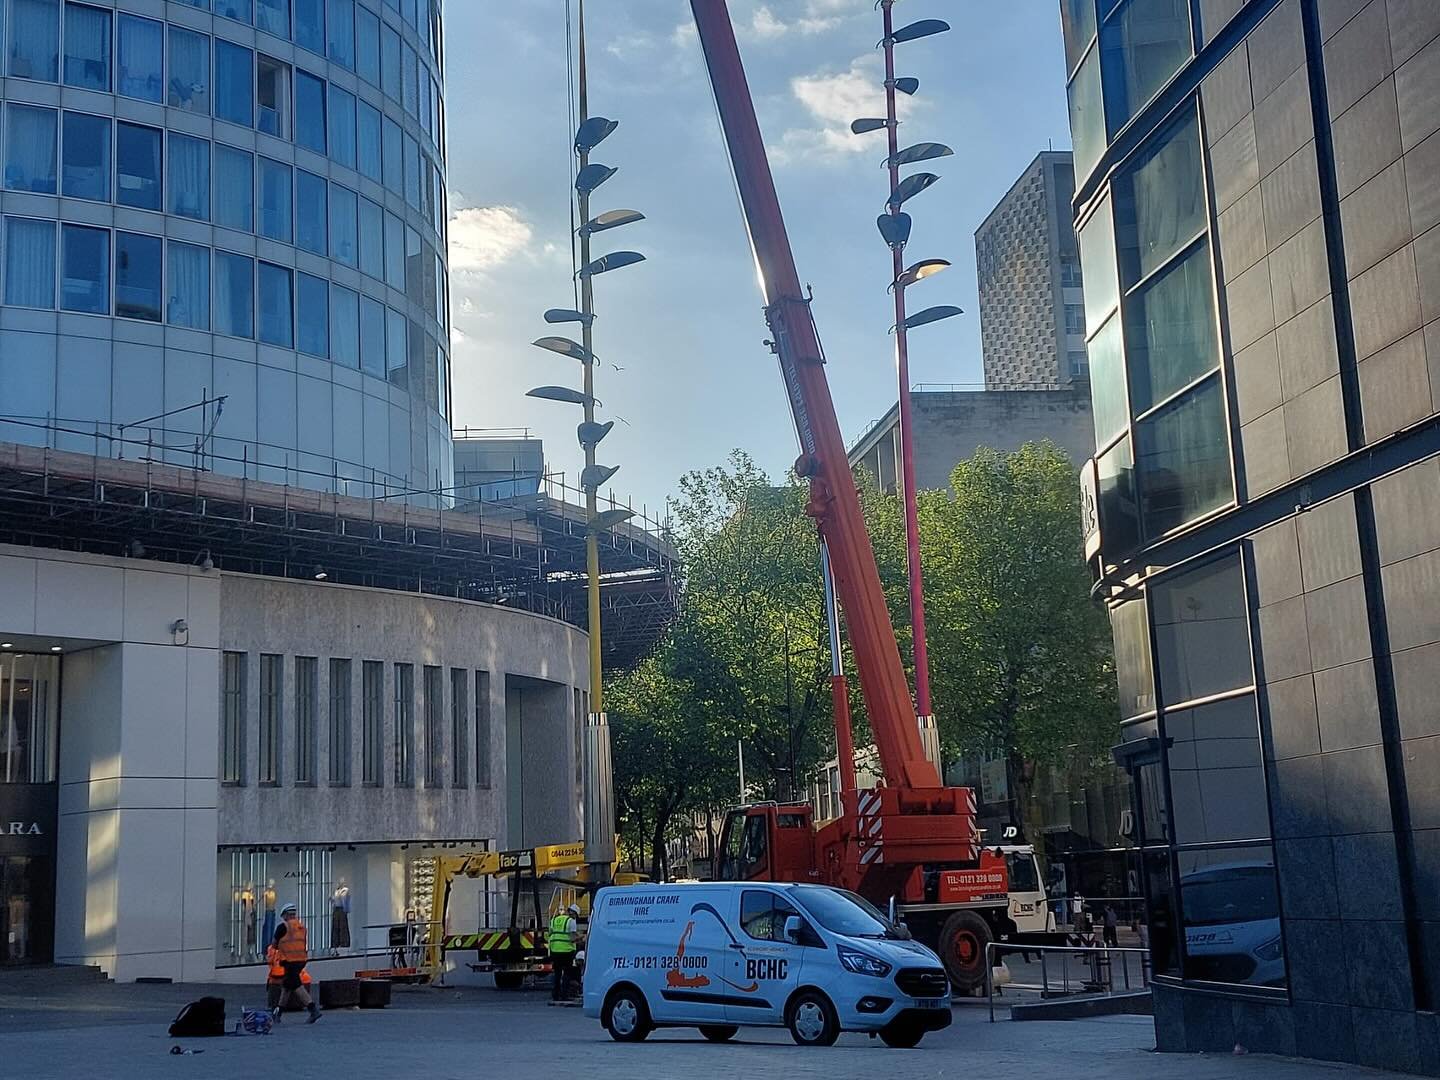 Birmingham on a beautiful sunny Sunday evening. 
The BCHC lift team carrying out another professional contract lift under the watchful eye of Birmingham&rsquo;s own iconic bull 🐂 #birmingham #bchc #contractlift #engineering #cranehire